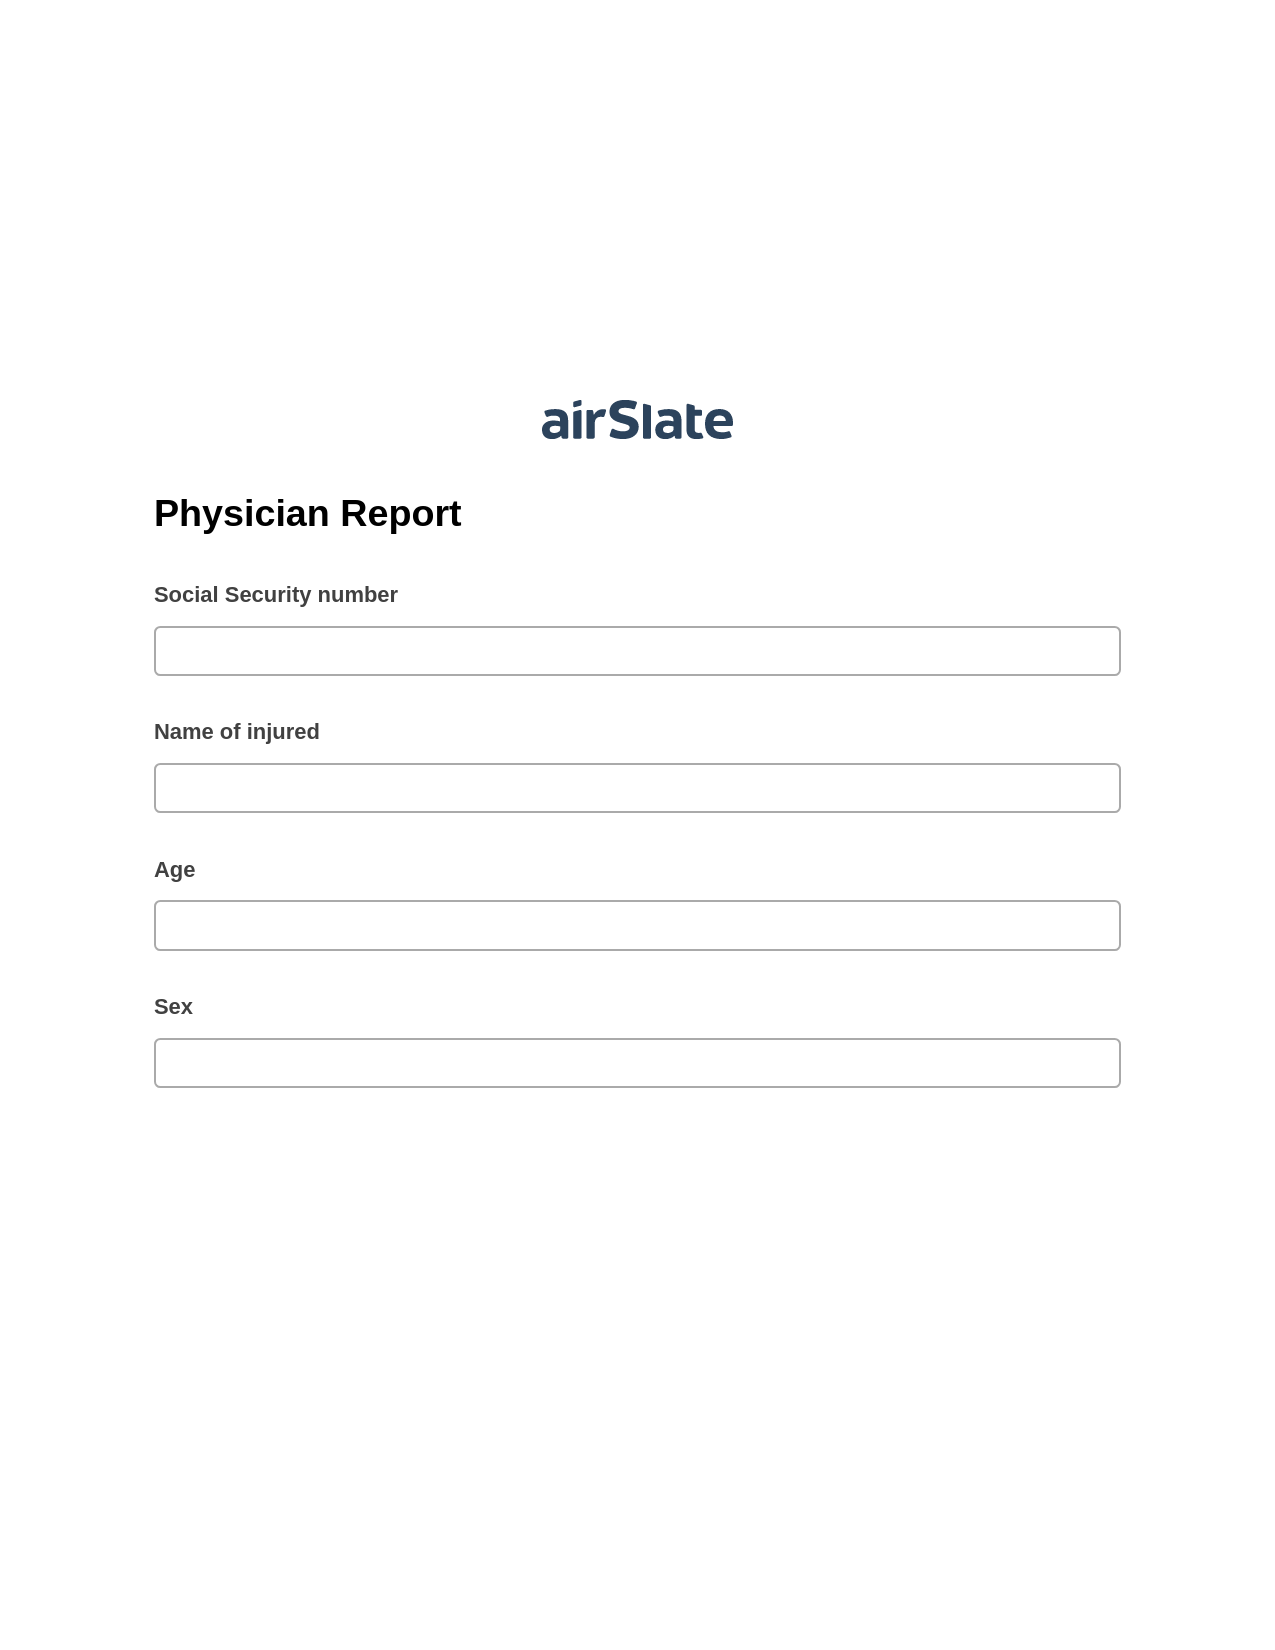 Multirole Physician Report Pre-fill Dropdowns from Airtable, Lock the Slate Bot, Post-finish Document Bot